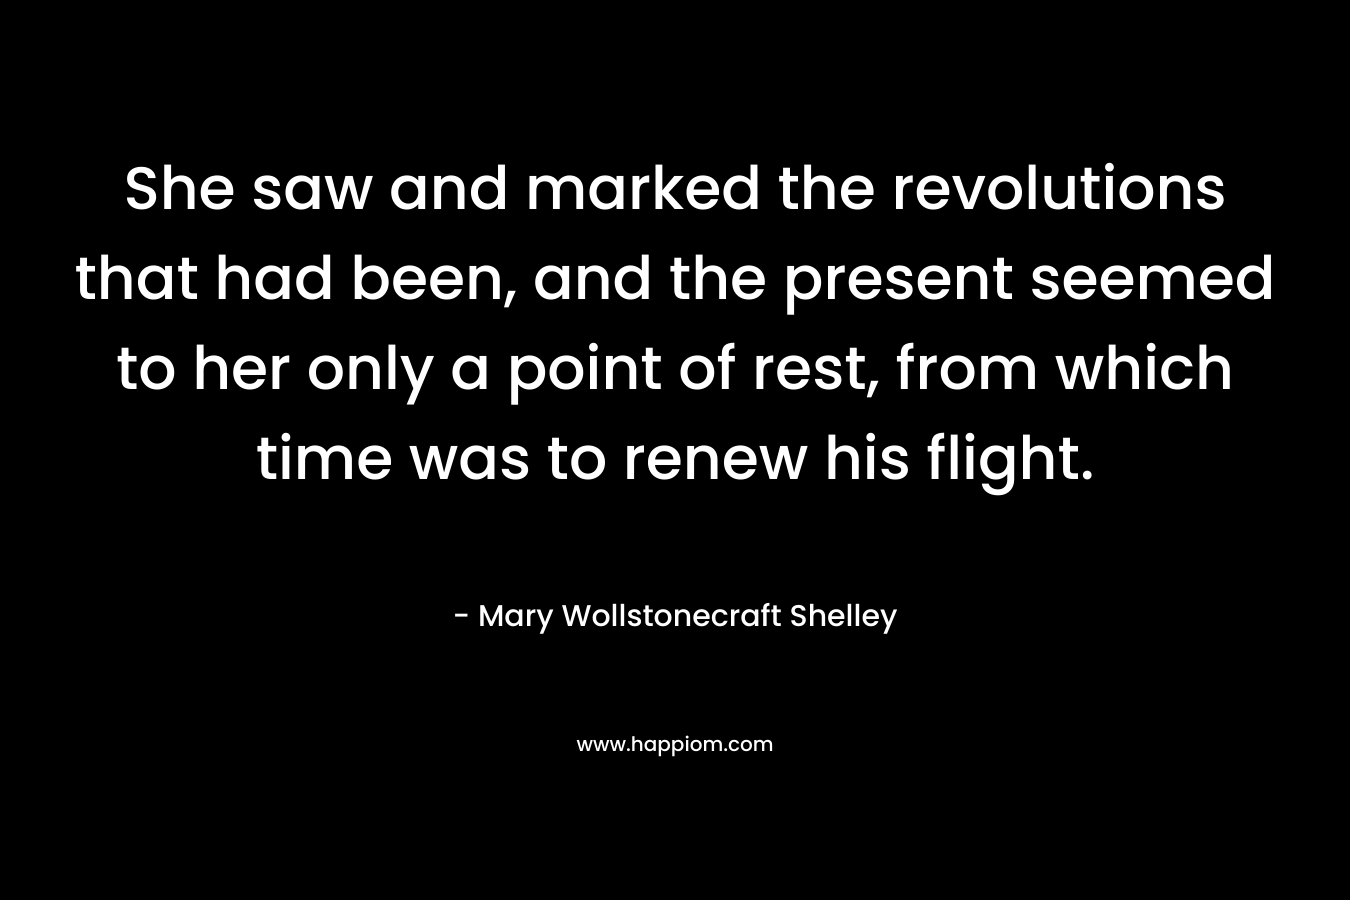 She saw and marked the revolutions that had been, and the present seemed to her only a point of rest, from which time was to renew his flight. – Mary Wollstonecraft Shelley